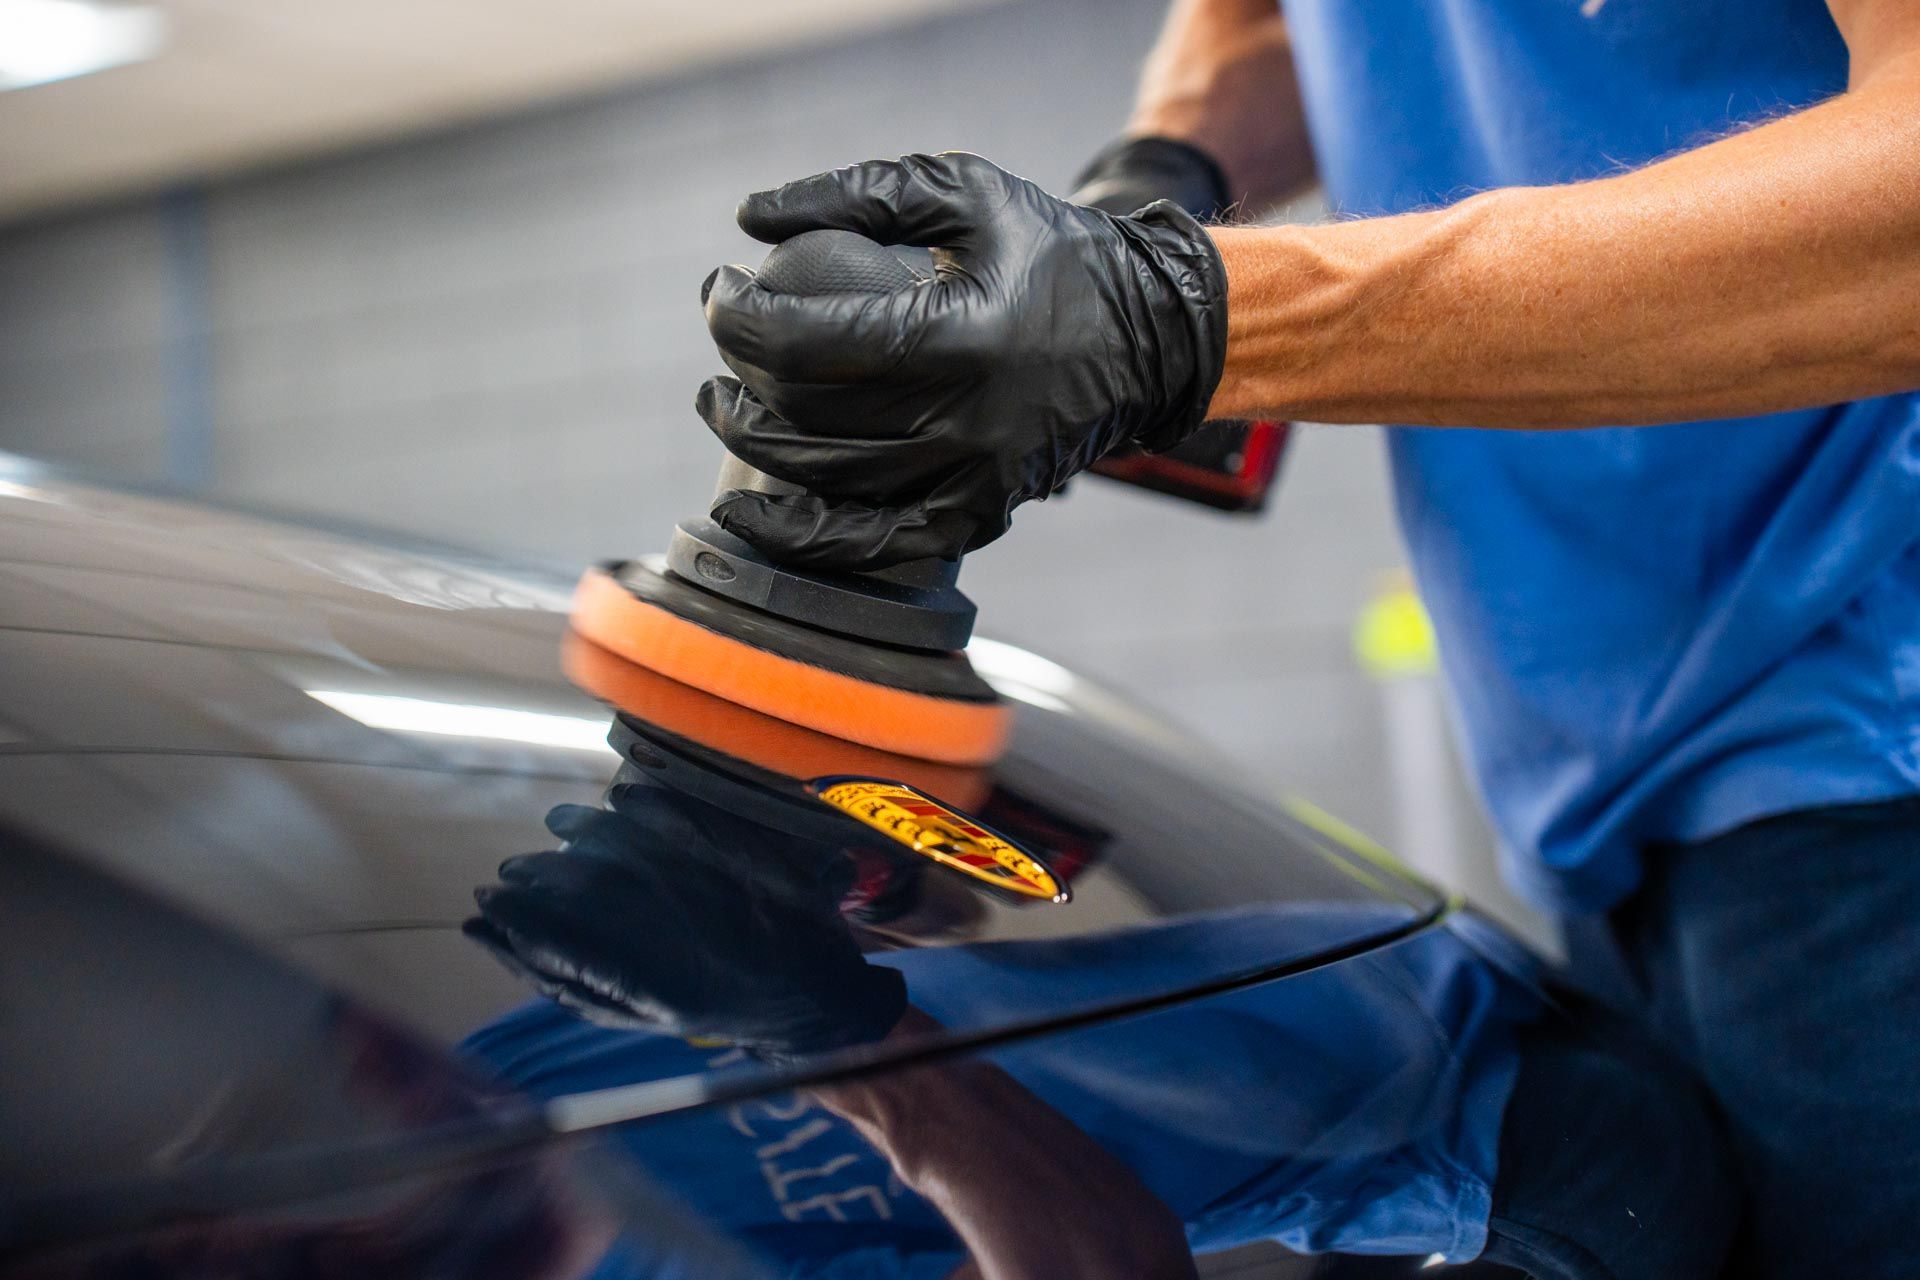 Paint Correction - A man is polishing the hood of a car with a buffing machine.